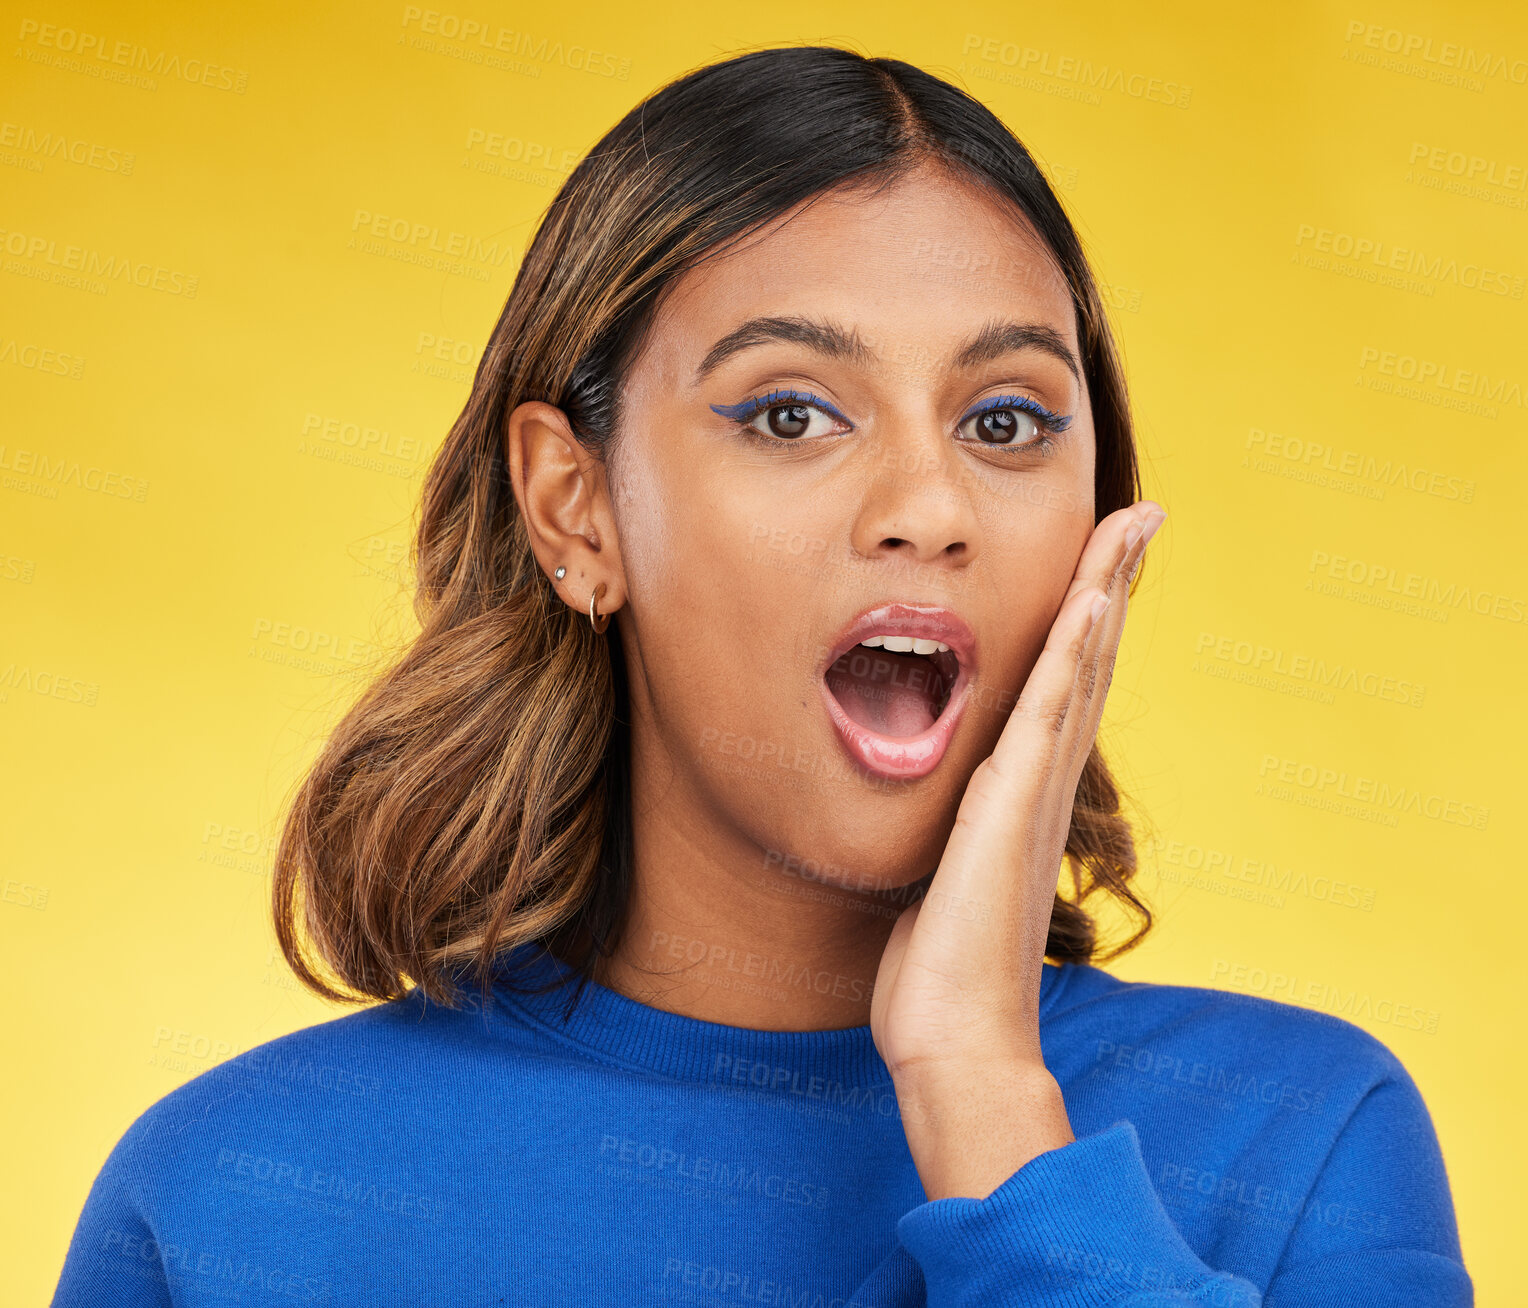 Buy stock photo Shock, surprise and portrait of woman in a studio with a puzzled or wtf facial expression. Young, good news and young Indian female model with a wow or omg face isolated by a yellow background.